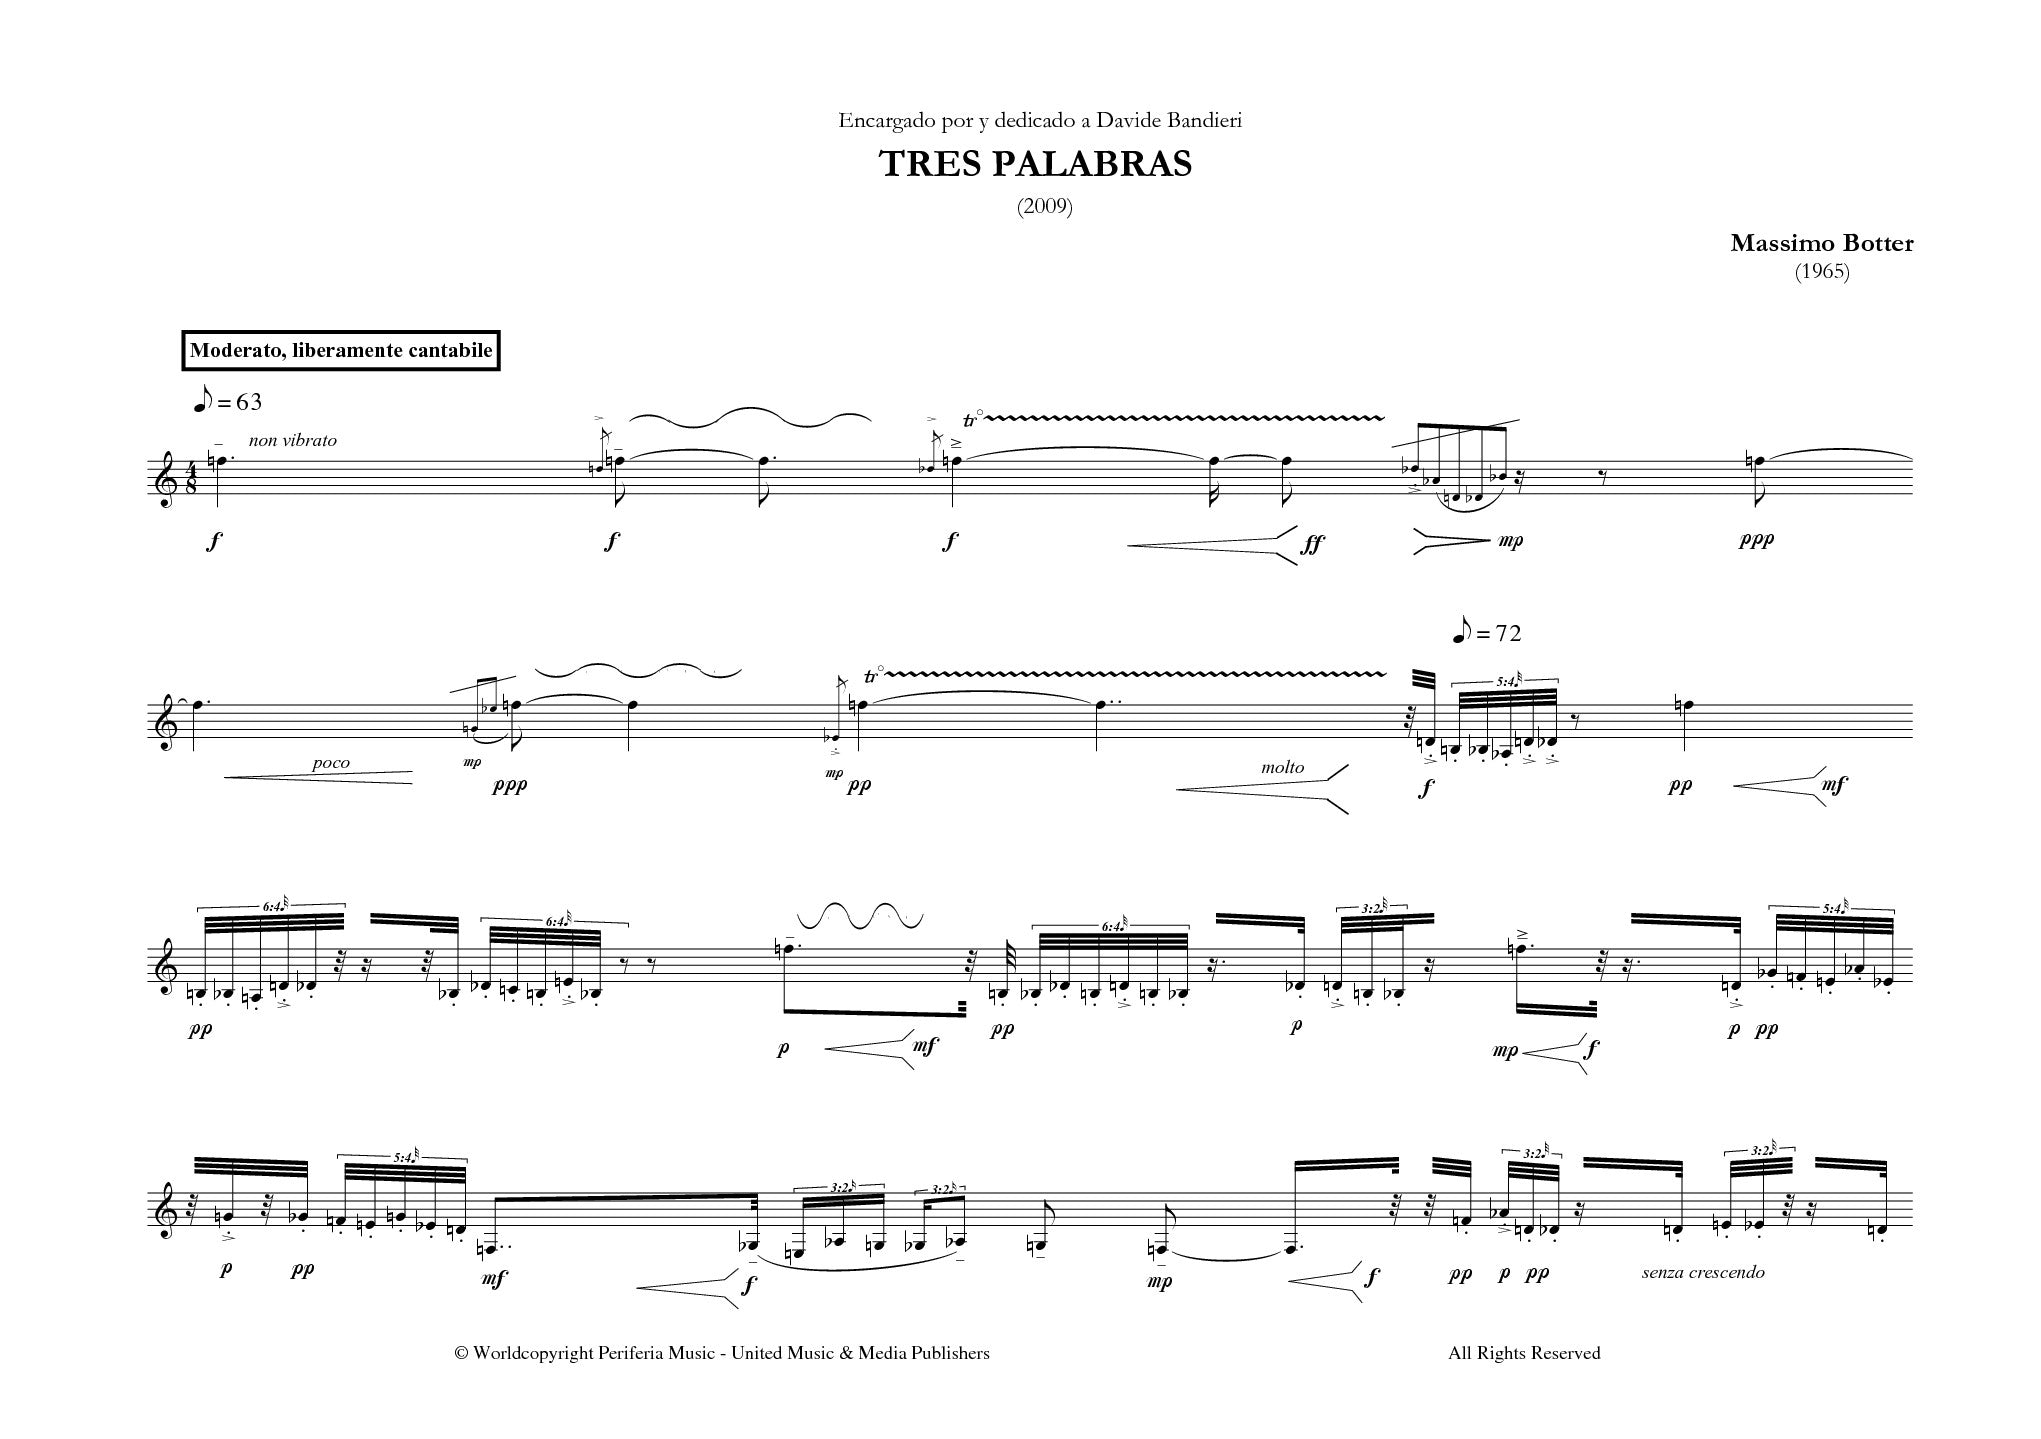 Botter - Tres Palabras for E-flat Clarinet Solo